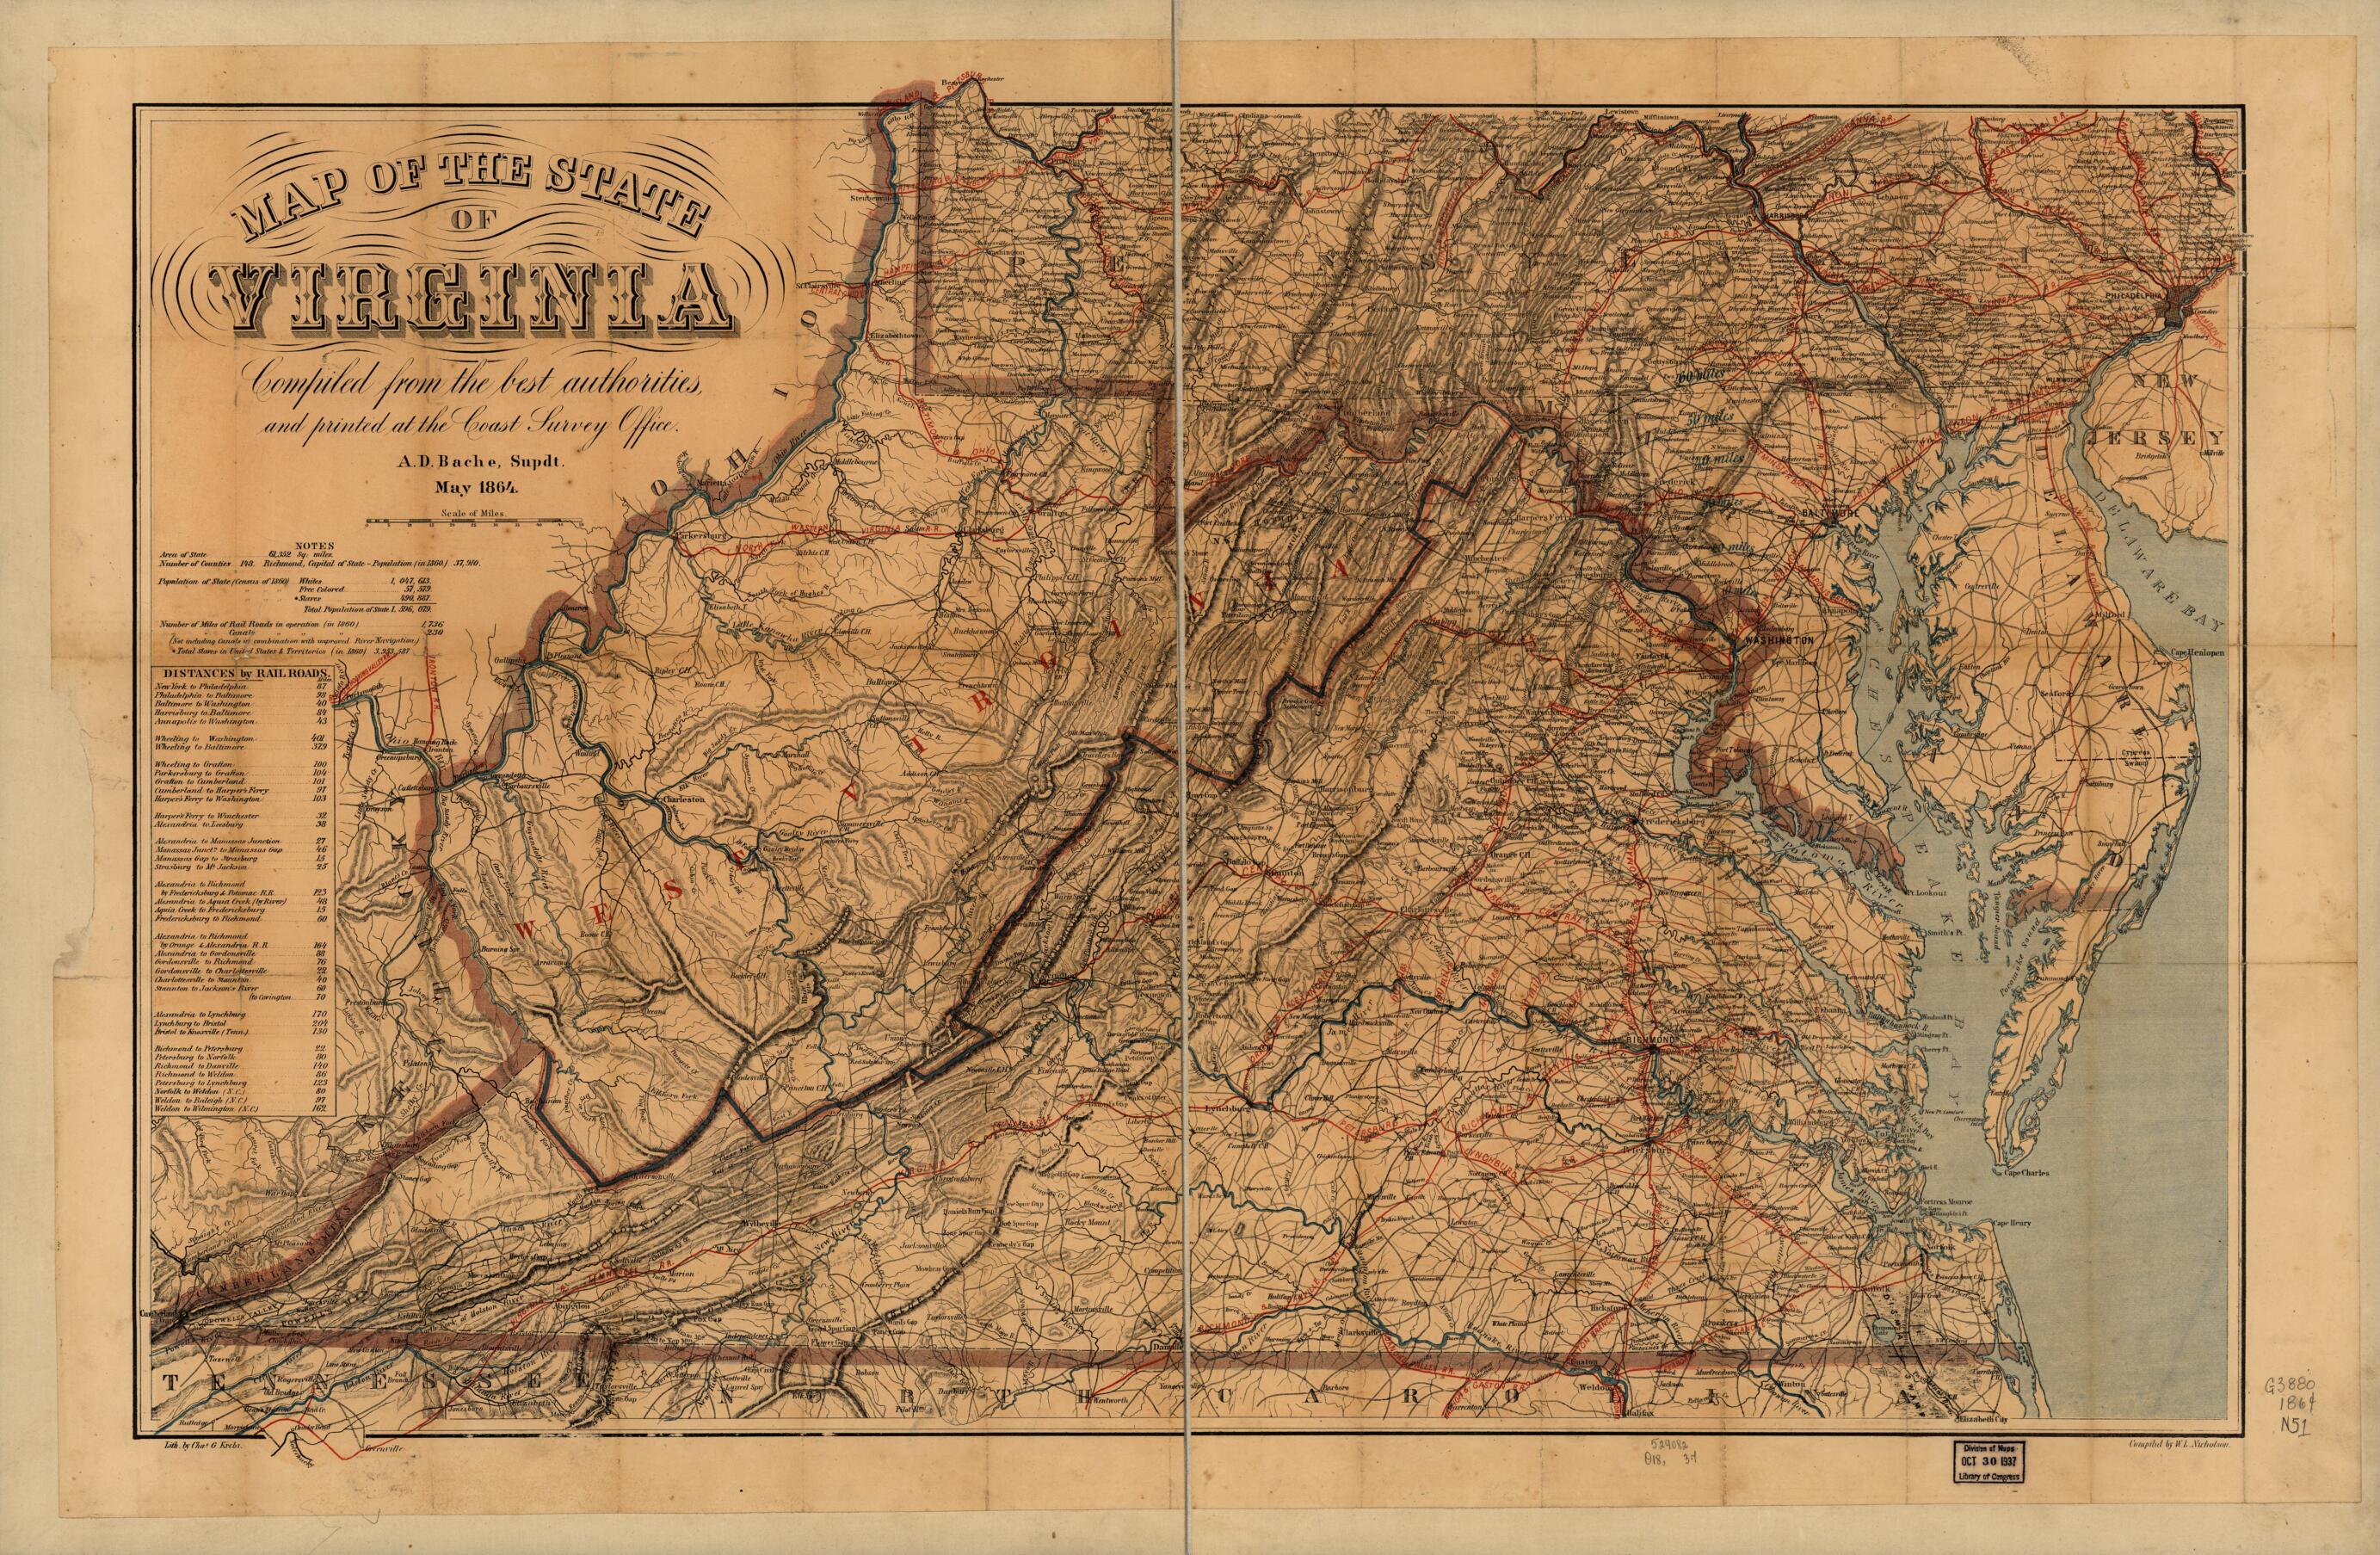 This old map of Map of the State of Virginia from 1864 was created by W. L. Nicholson in 1864